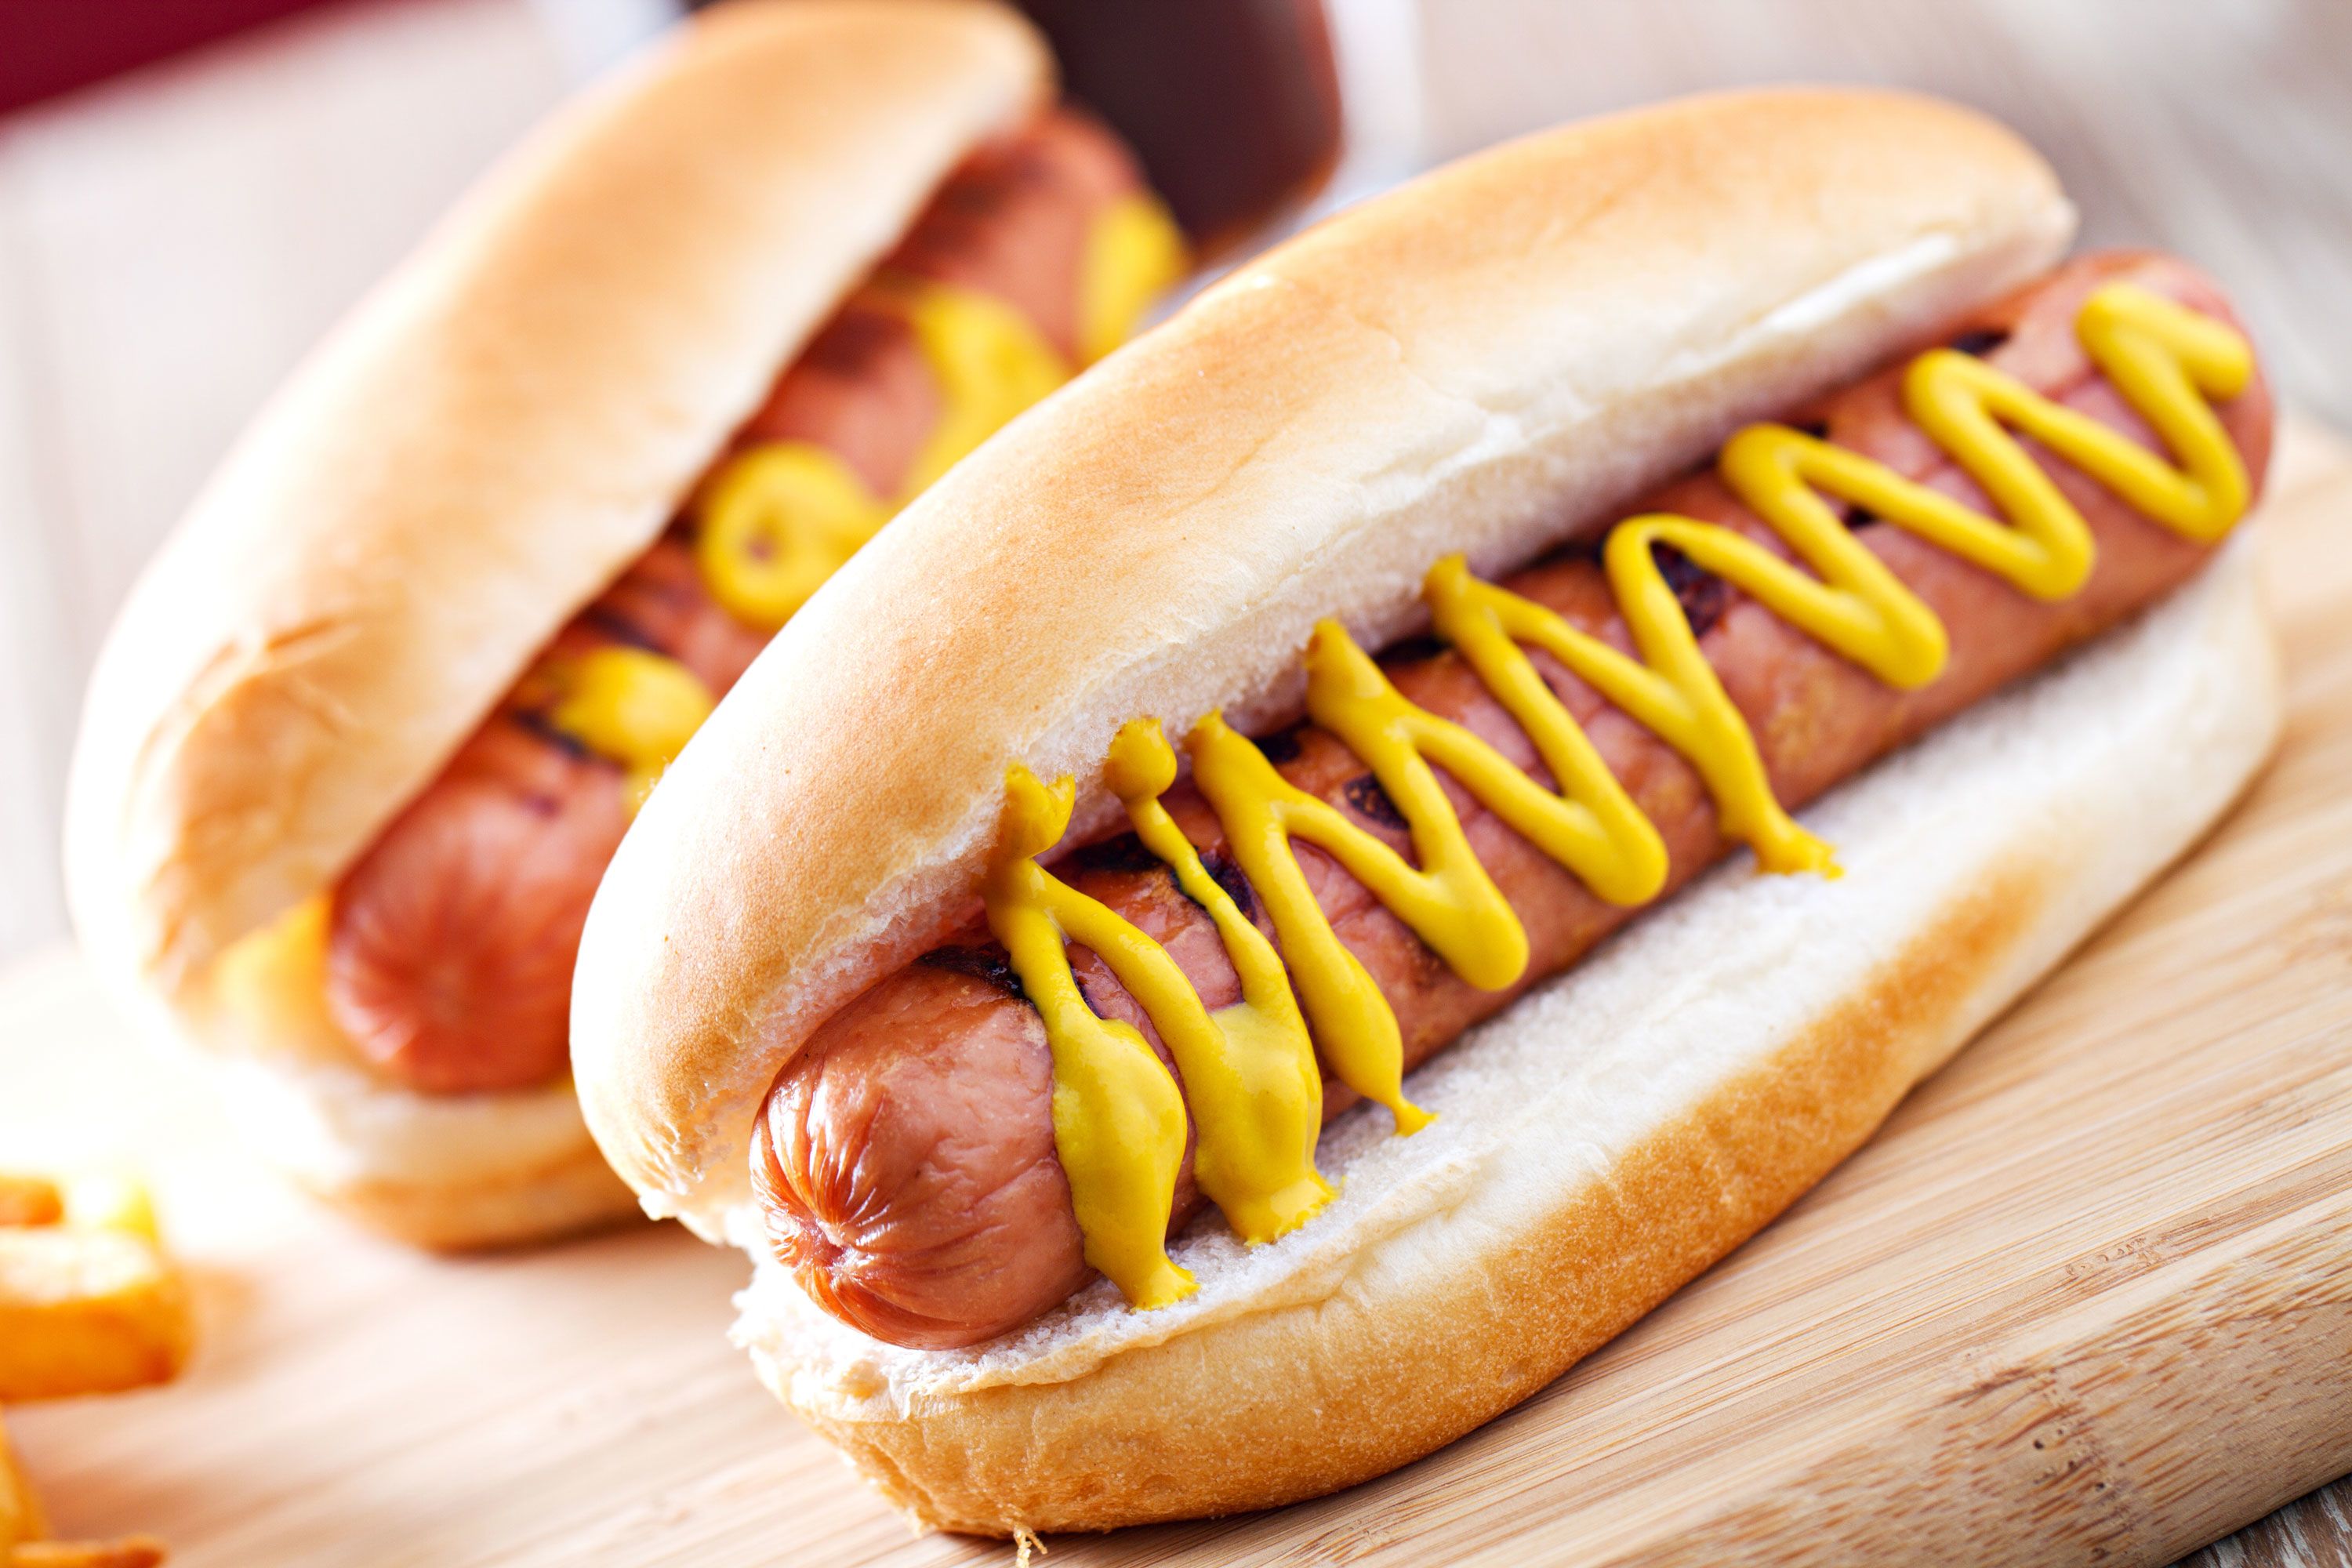 Eating a hot dog could take 36 minutes off your life, study says